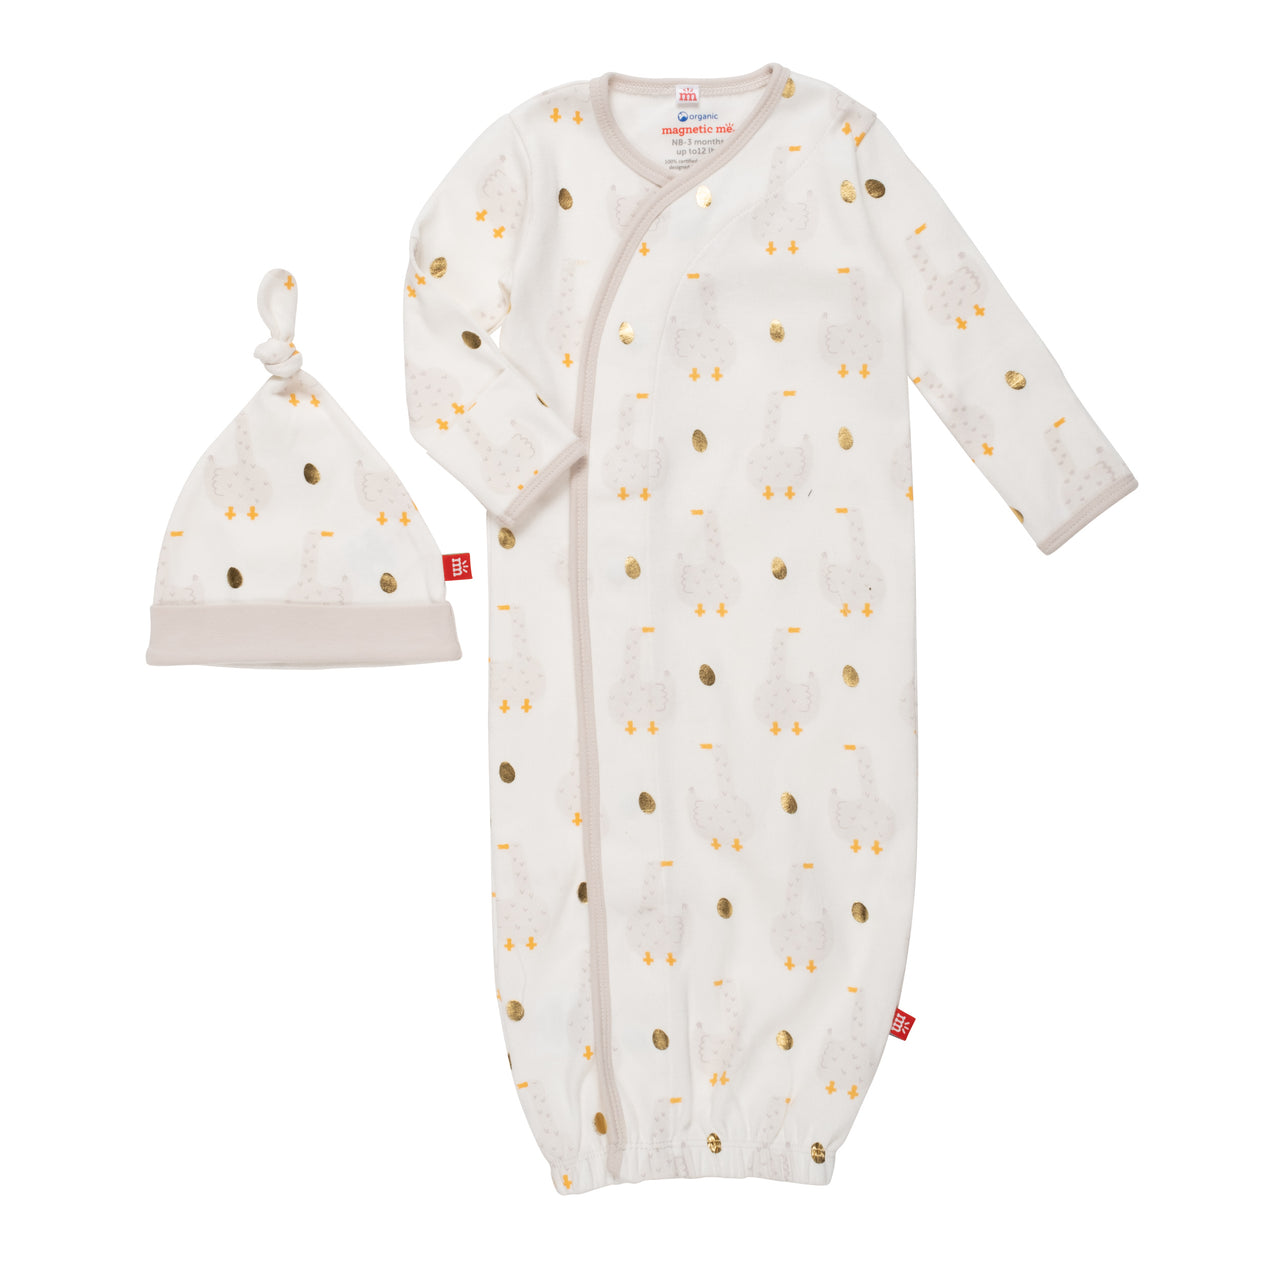 Magnetic Me Magnetic Gown & Hat Set NB/3m 5009